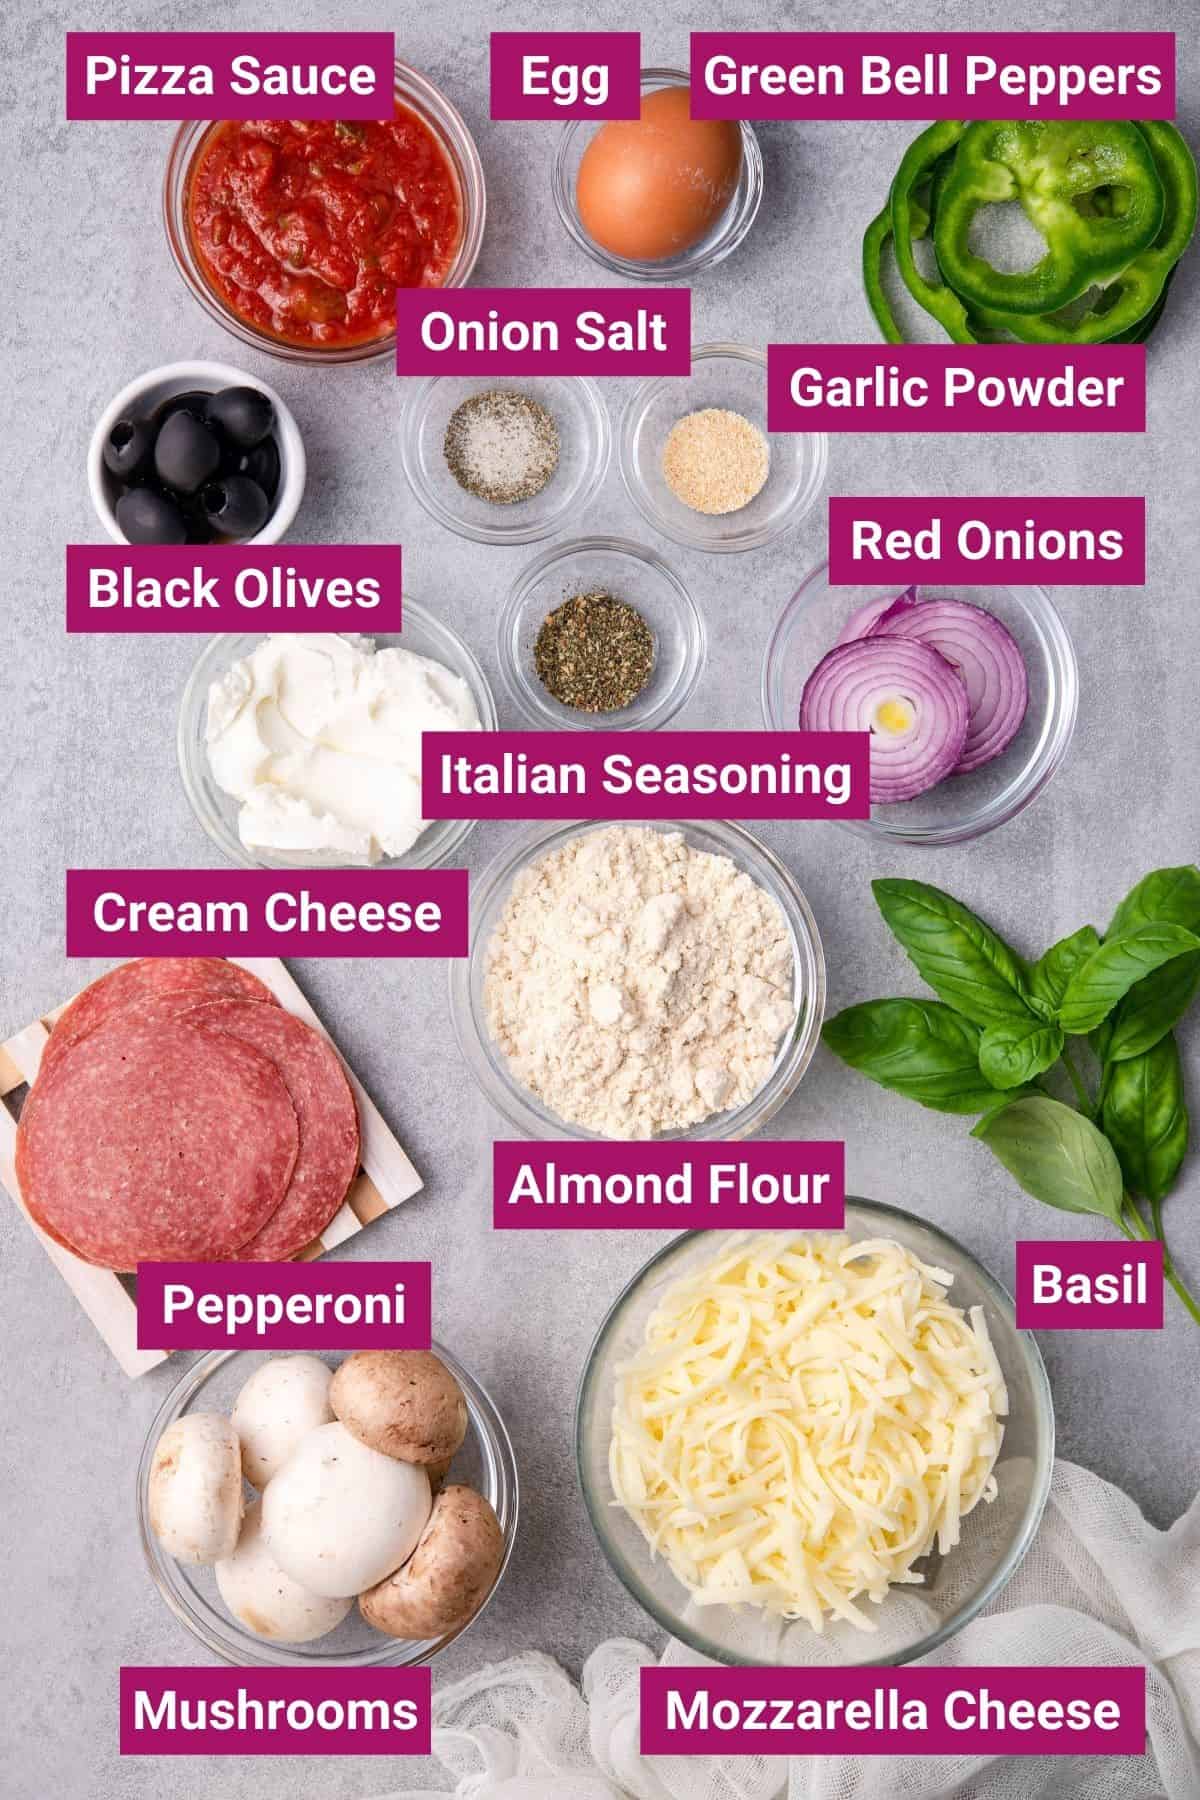 ingredients of Fathead Pizza Dough (keto pizza crust) in separate bowls: pizza sauce, egg, green bell peppers, onion salt, garlic powder, red onions, black olives, cream cheese, pepperoni, almond flour, Italian seasoning, shredded mozzarella, mushrooms, and basil